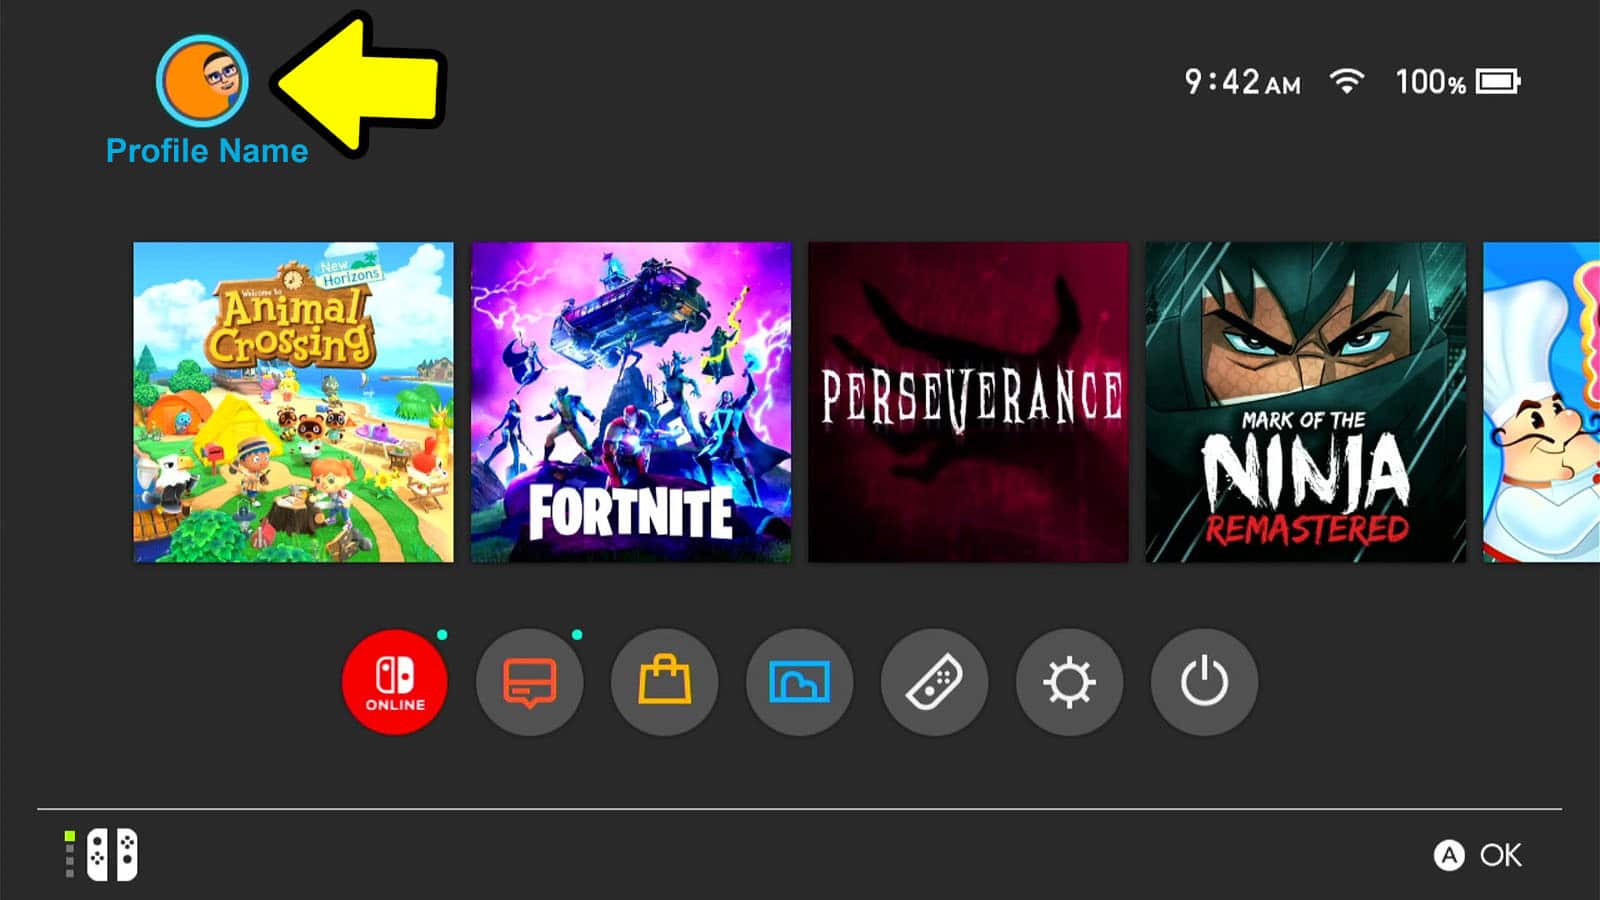 Nintendo Switch Home Menu screen with game icons in the center with a yellow arrow pointing at icons in the tope left corner of the screen